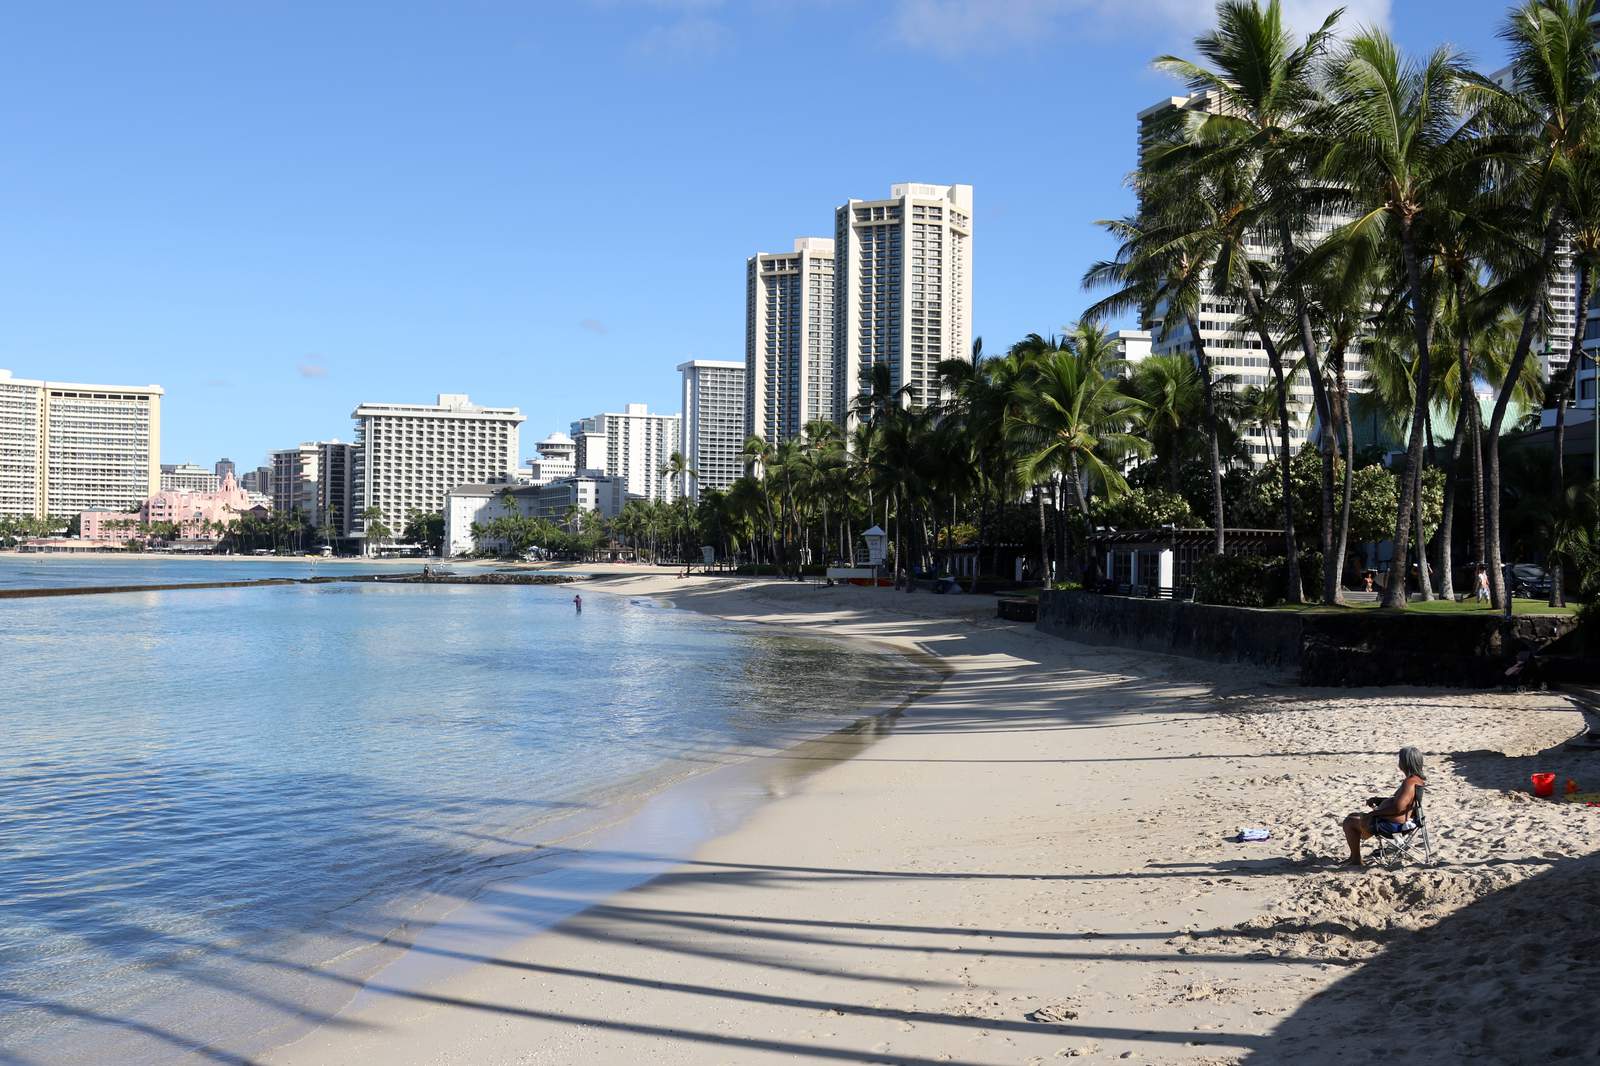 Hawaii pushes forward with tourism despite safety concerns